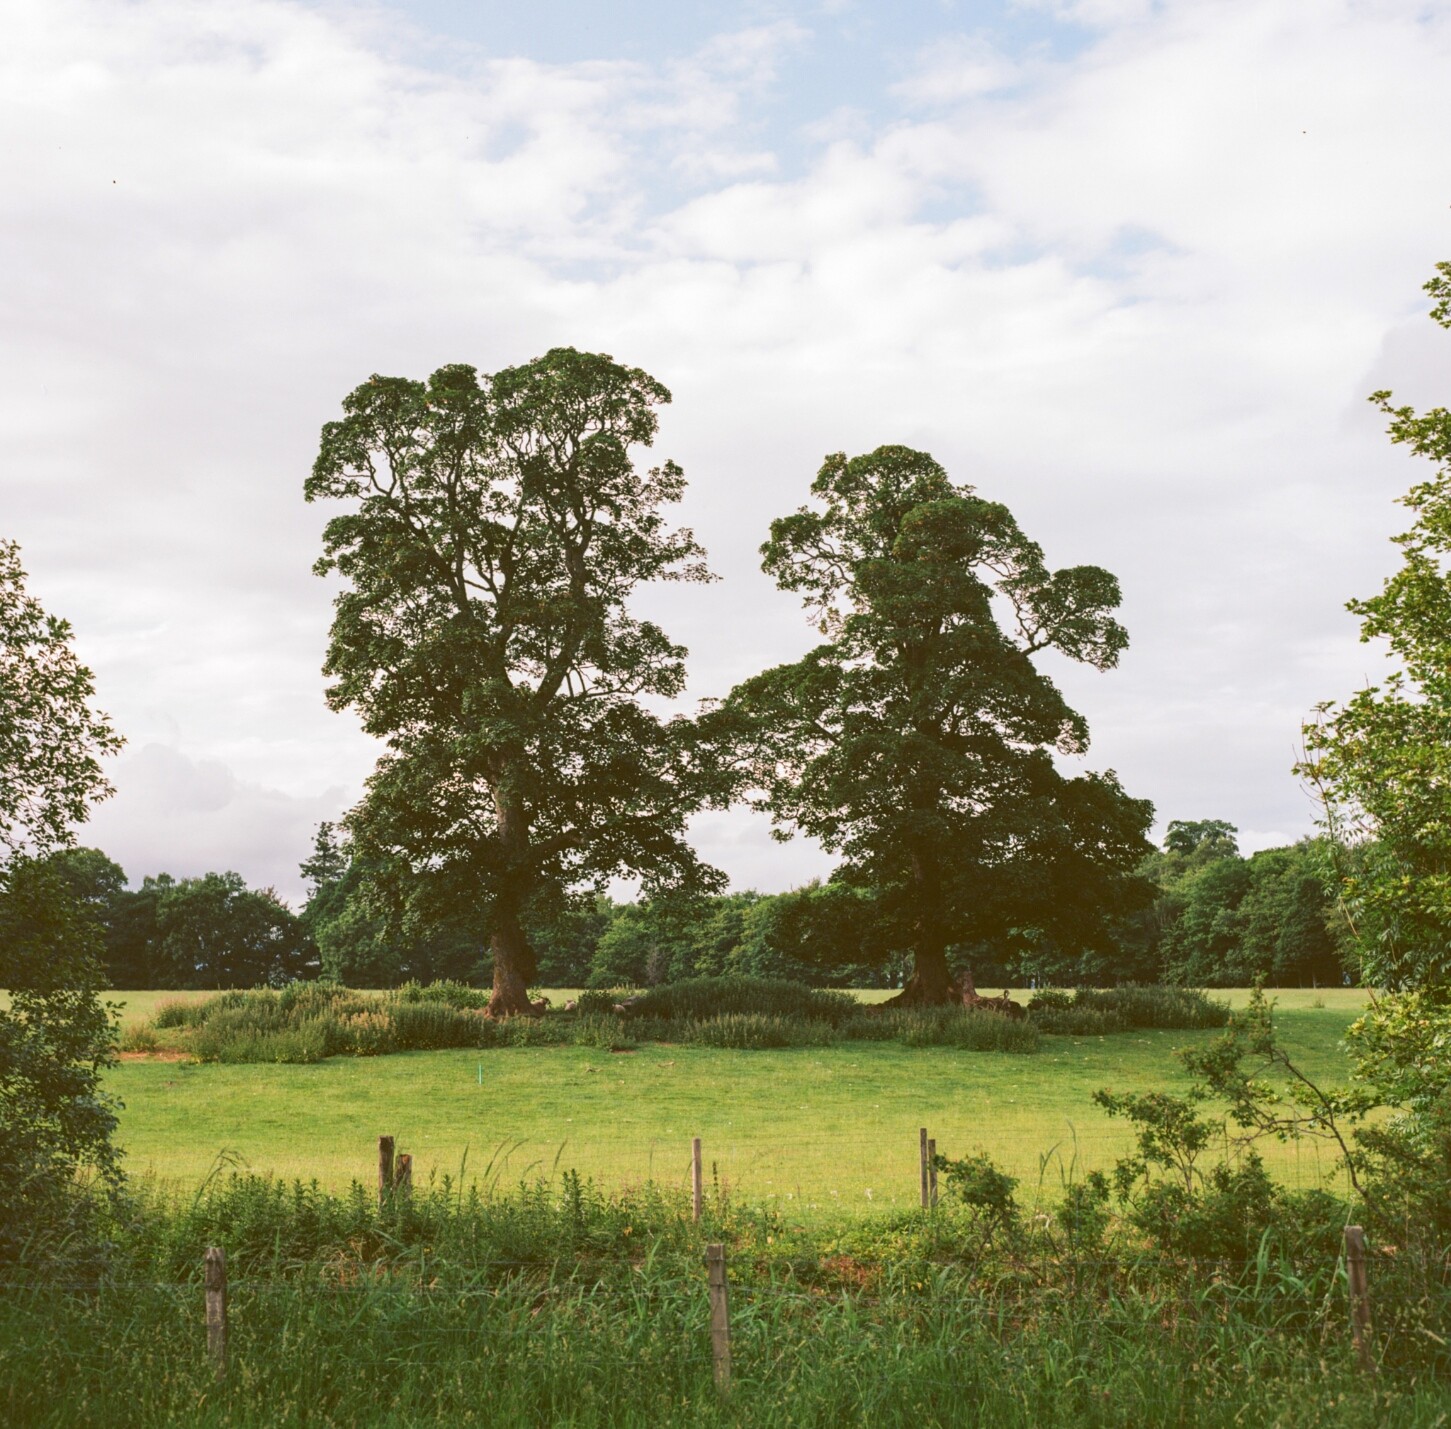 A colour photograph of two trees standing tall in a field. The light is slightly golden and the trees are surrounded by all kinds of greenery. The sky is softened by clouds with some powdery blue visible through them.